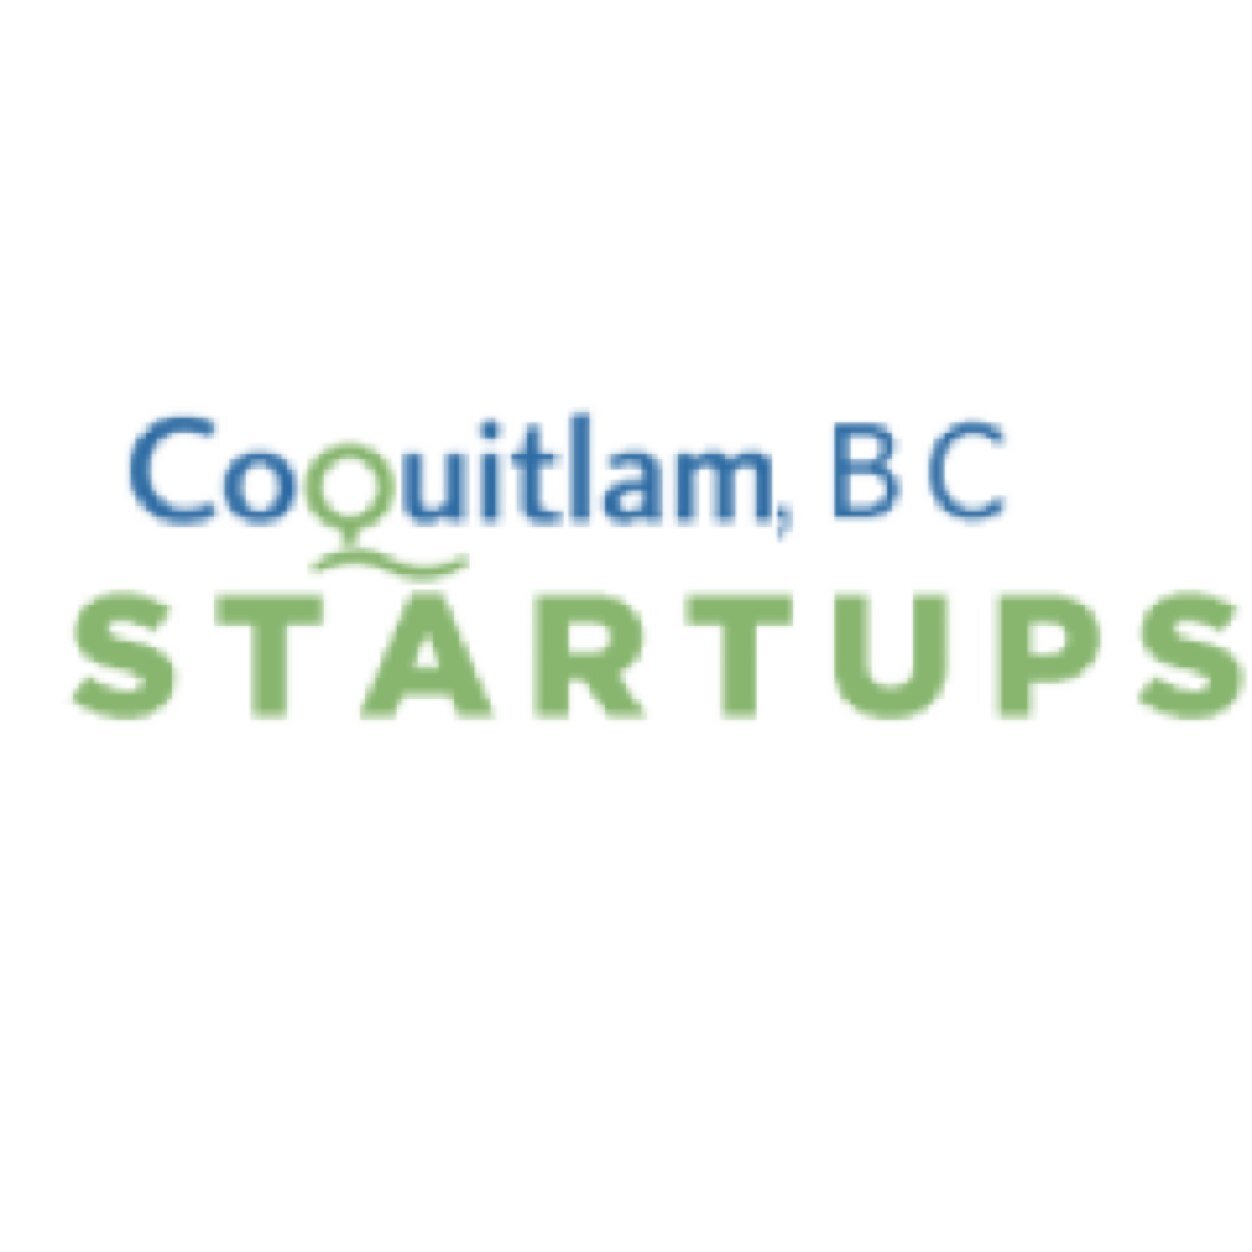 Official Twitter account of the 'Coquitlam Startups' meetup group, and the voice for #startups in Coquitlam. #COQStartups